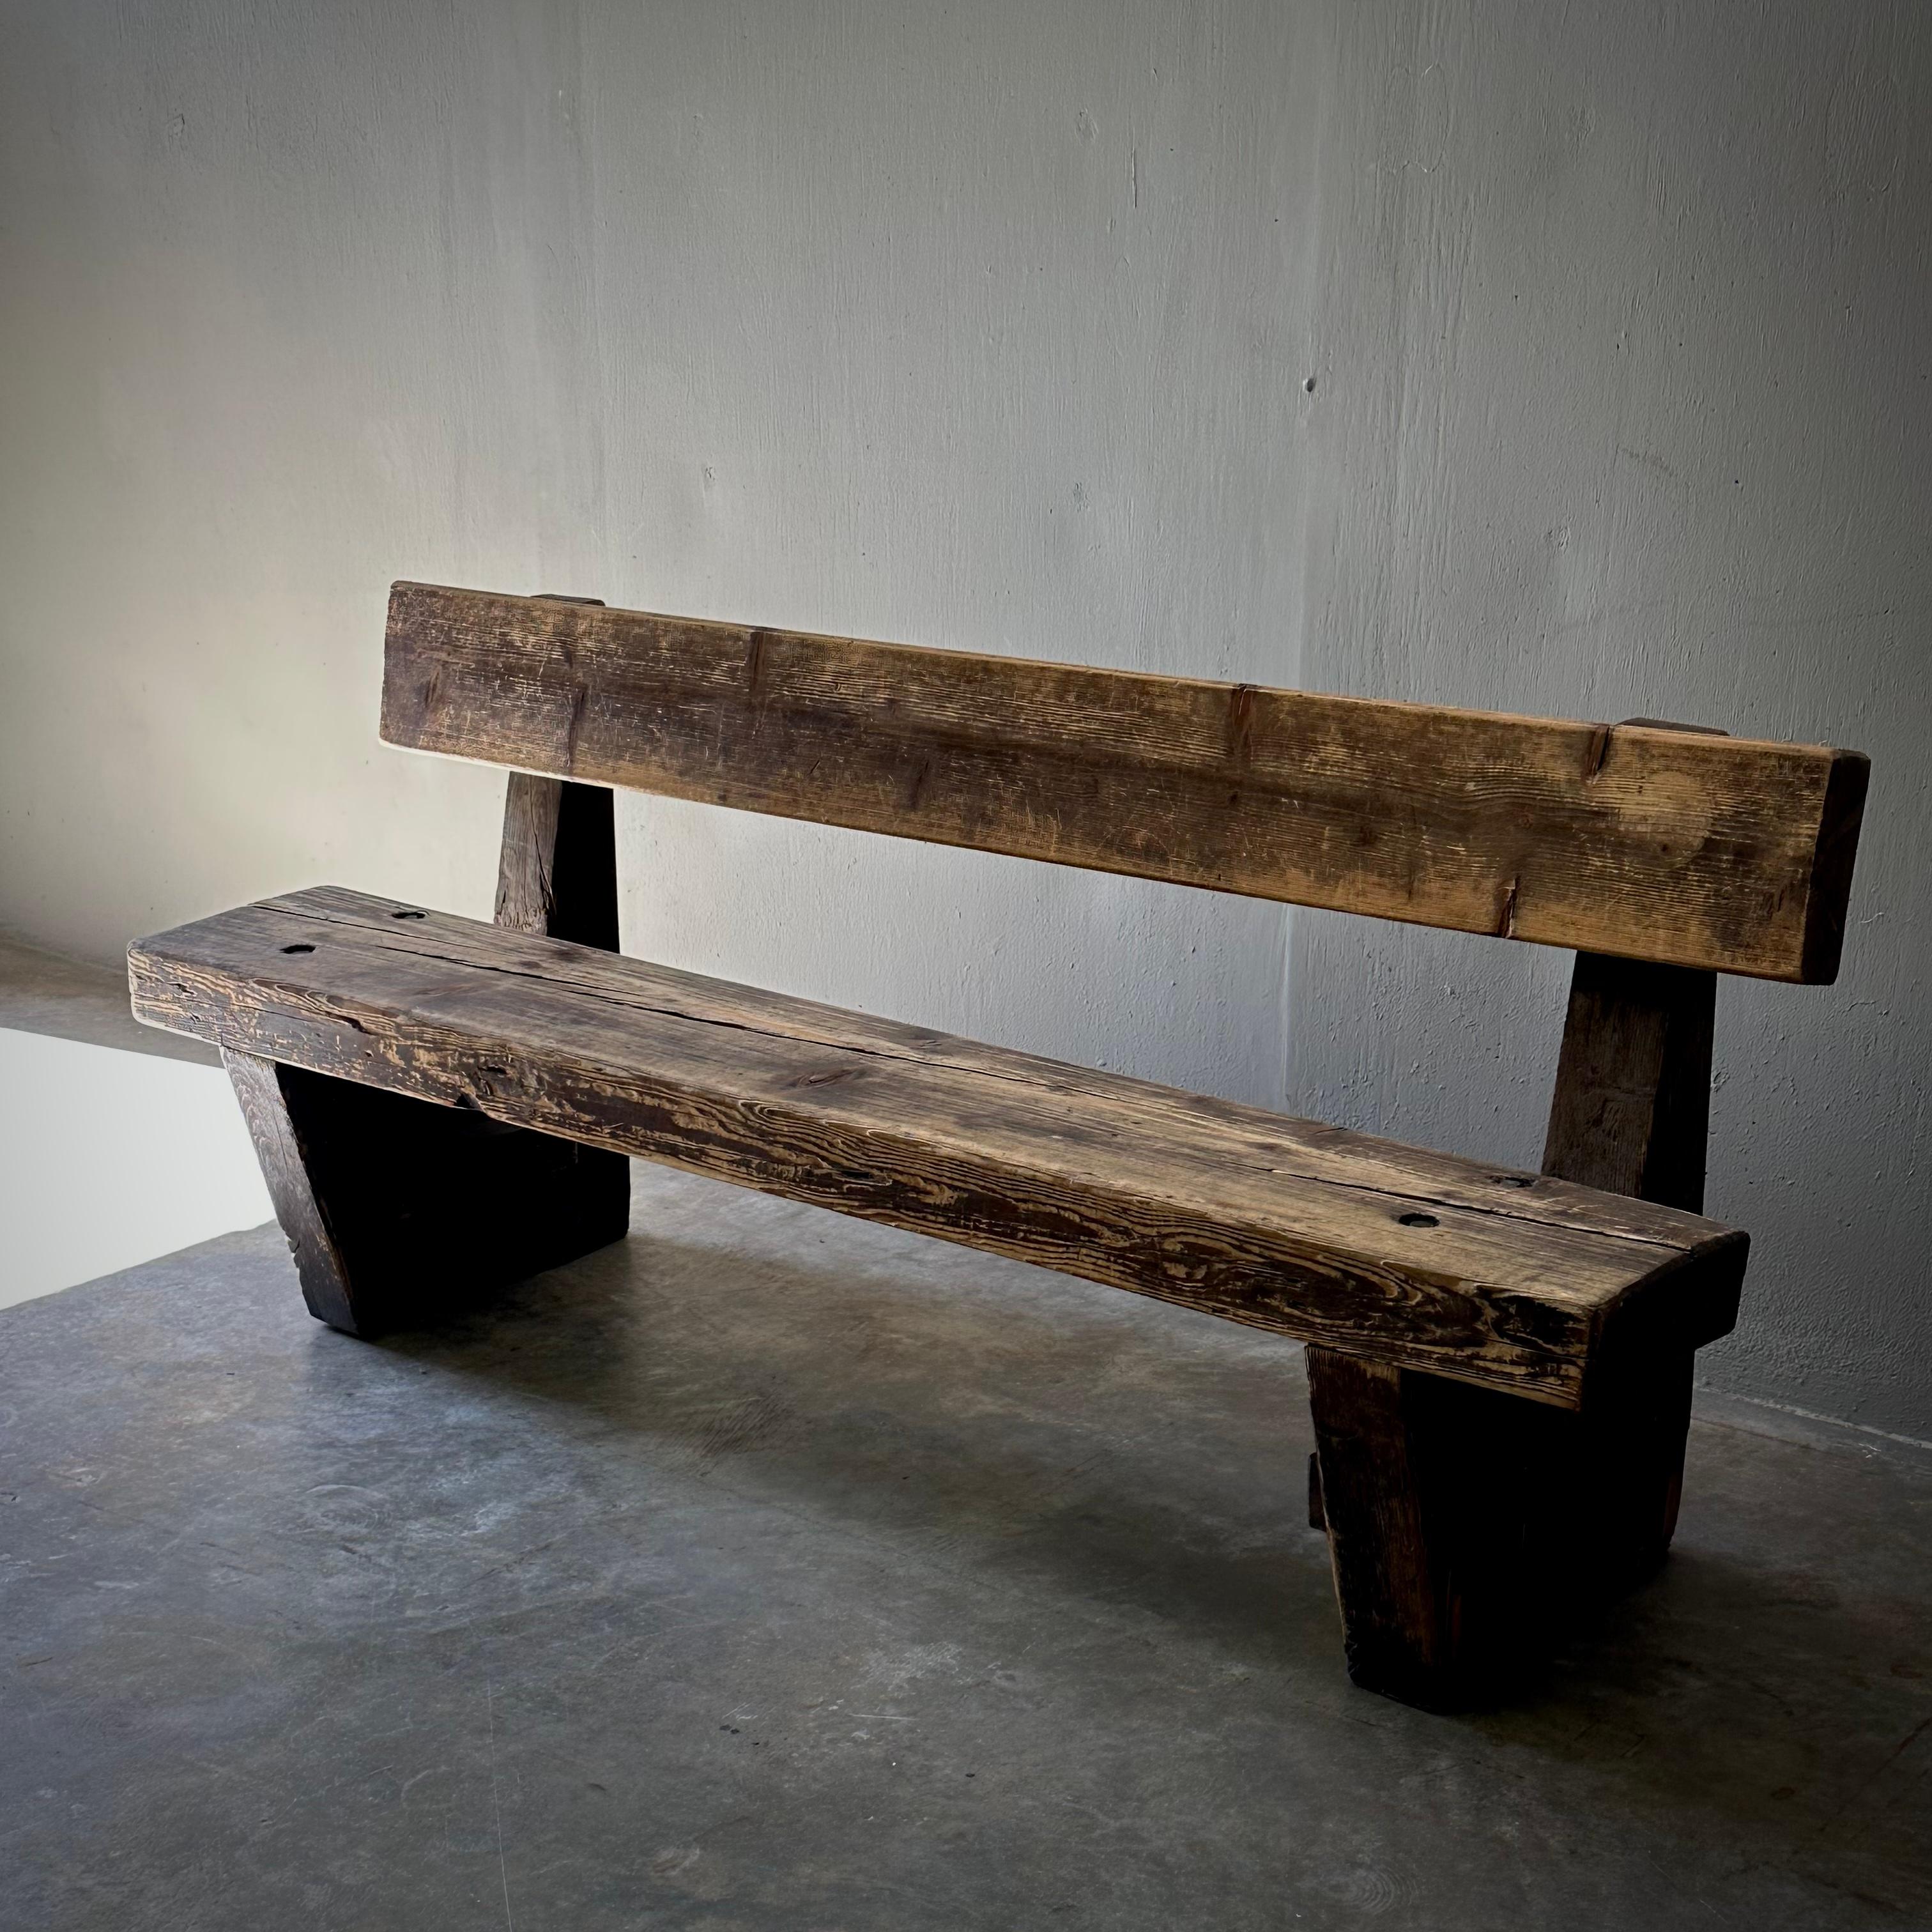 Rustic 19th century wooden bench, originally from a former pub in the city of Amsterdam. Would work well in any hallway, entry, or semi-covered patio space, with its humble silhouette and beautifully aged wood. An easy way of infusing a touch of